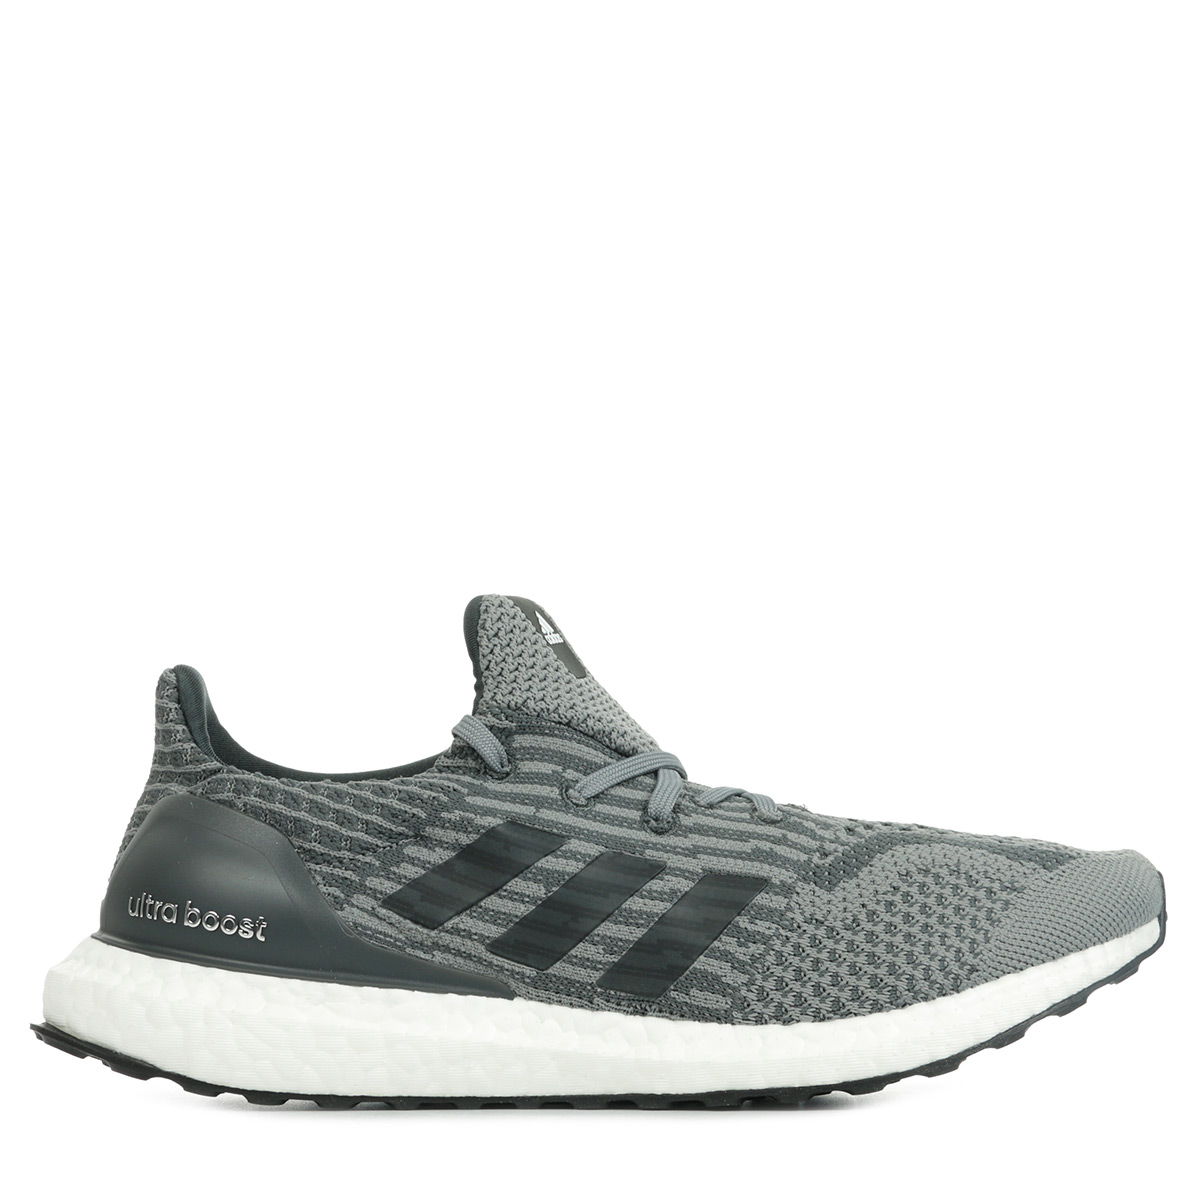 adidas Performance UltraBOOST 5.0 Uncaged DNA